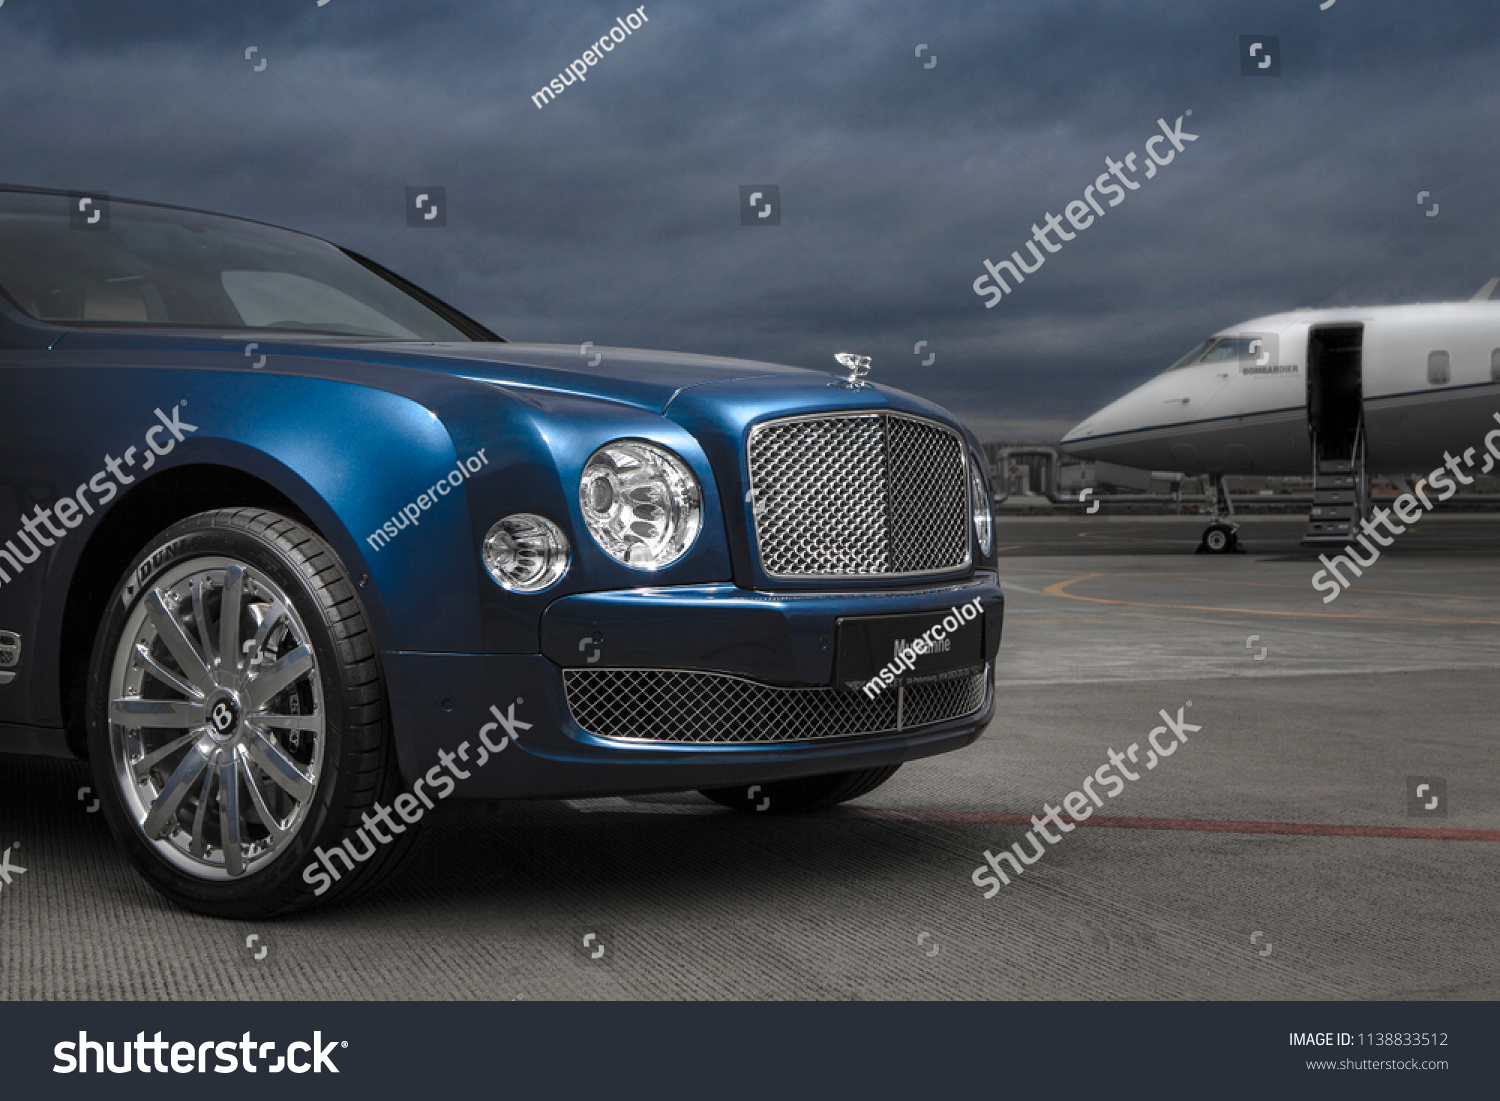 1,295 Black private jet Stock Photos, Images & Photography ...